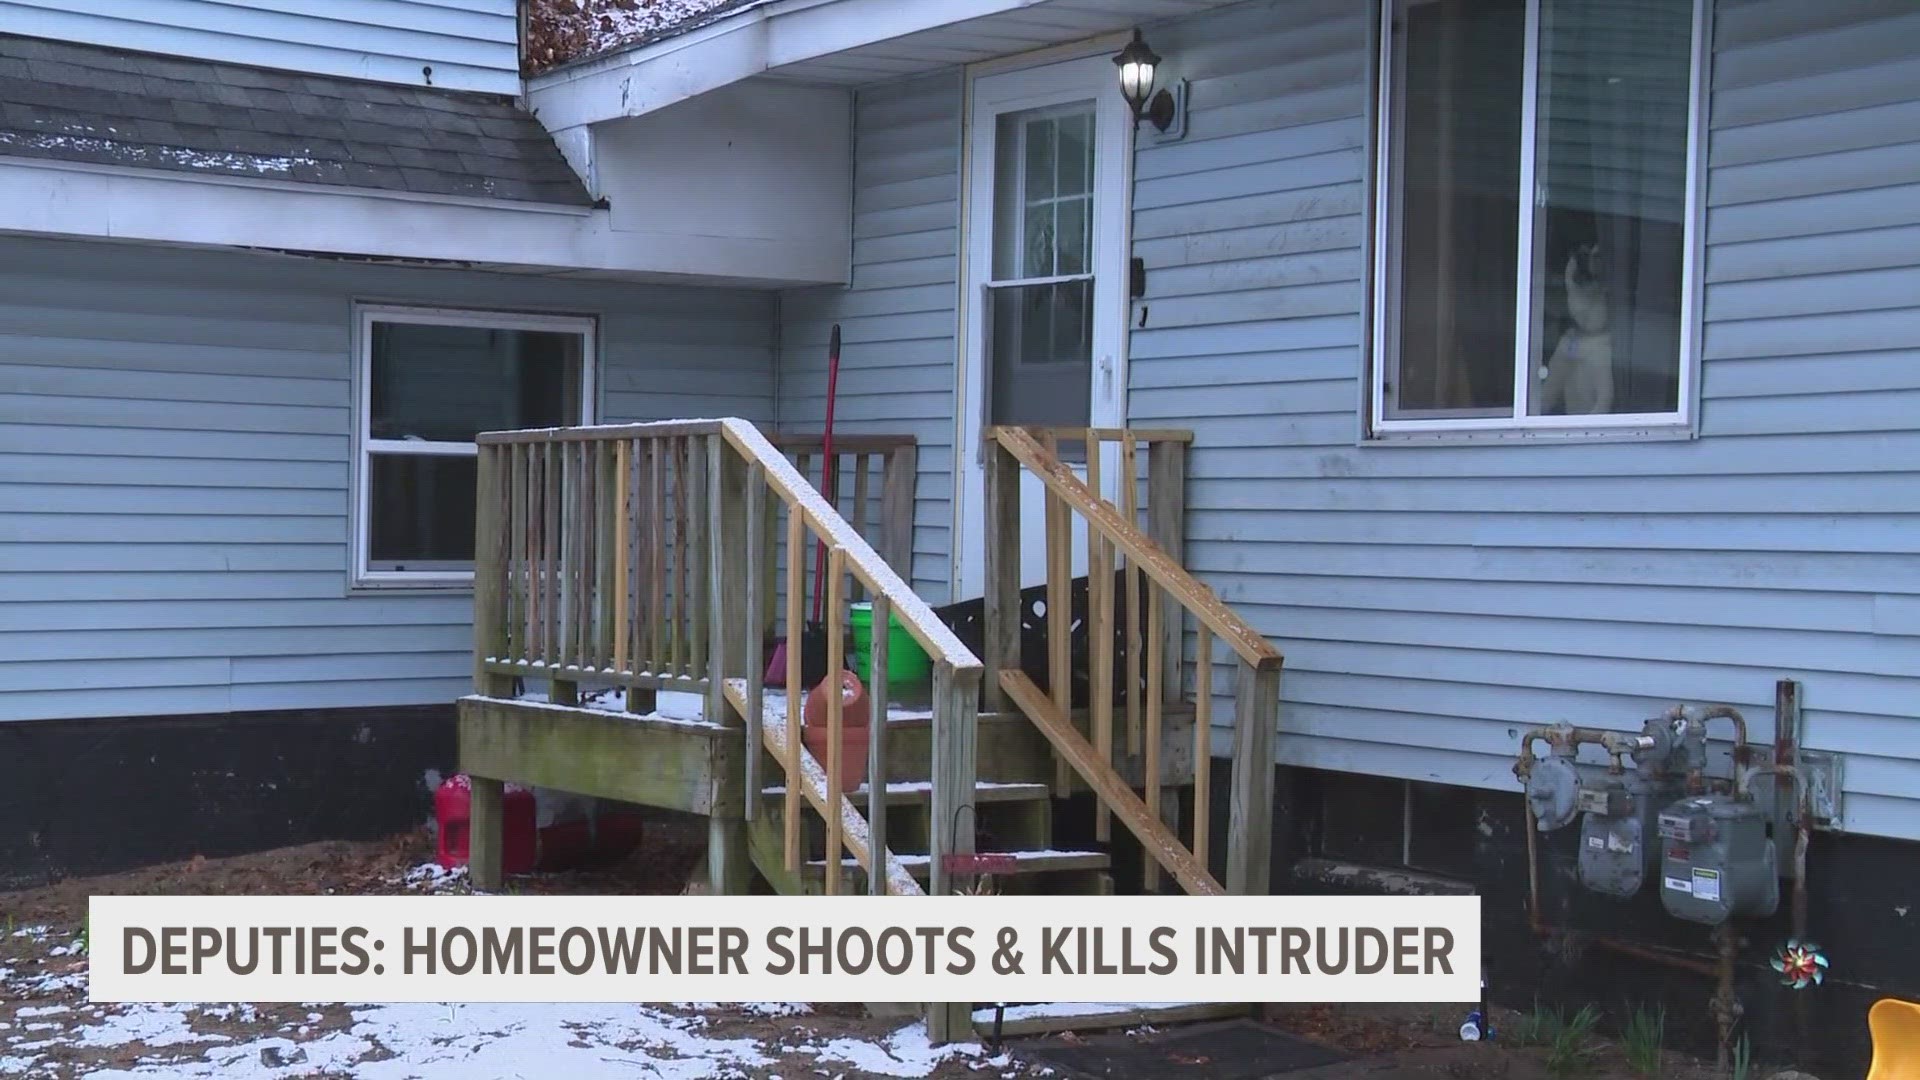 A homeowner shot and killed an intruder in Muskegon County early Monday morning. Authorities said the man broke into a connected apartment first.